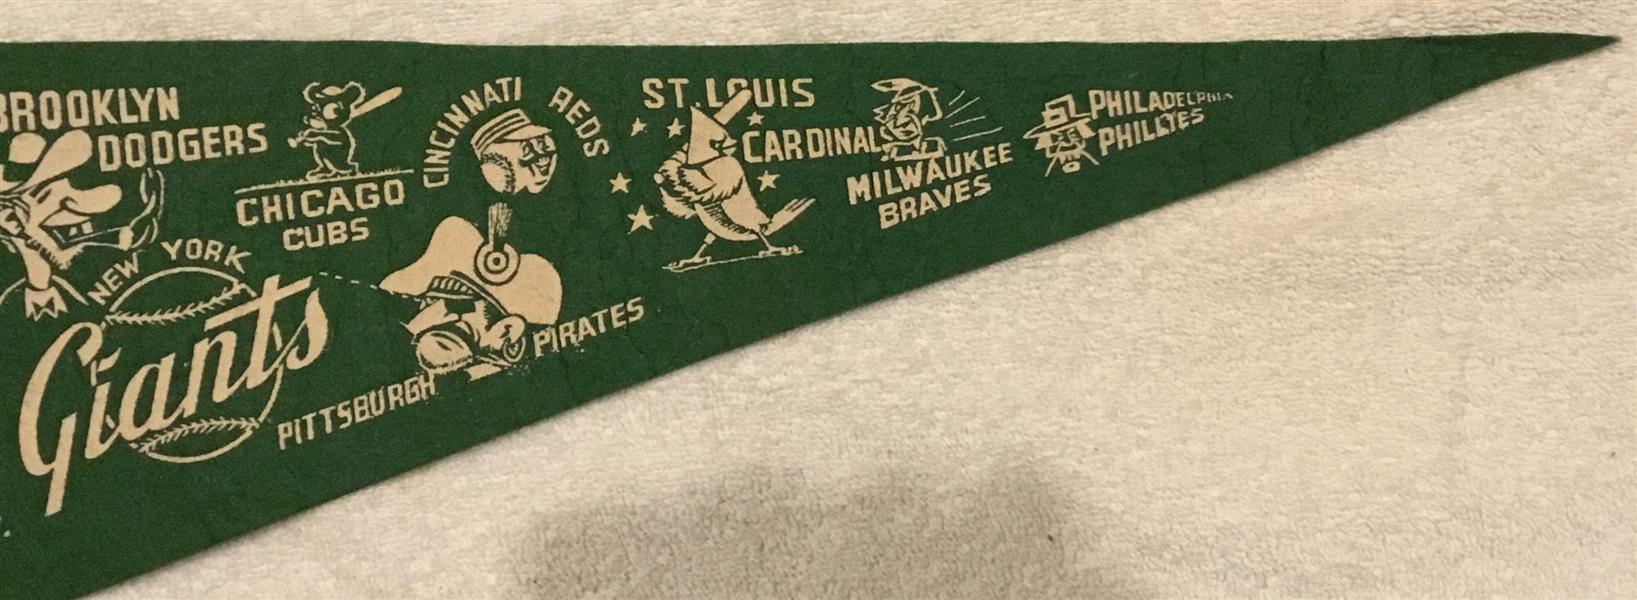 50's COOPERSTOWN PENNANT w/NATIONAL LEAGUE LOGOS - RARE